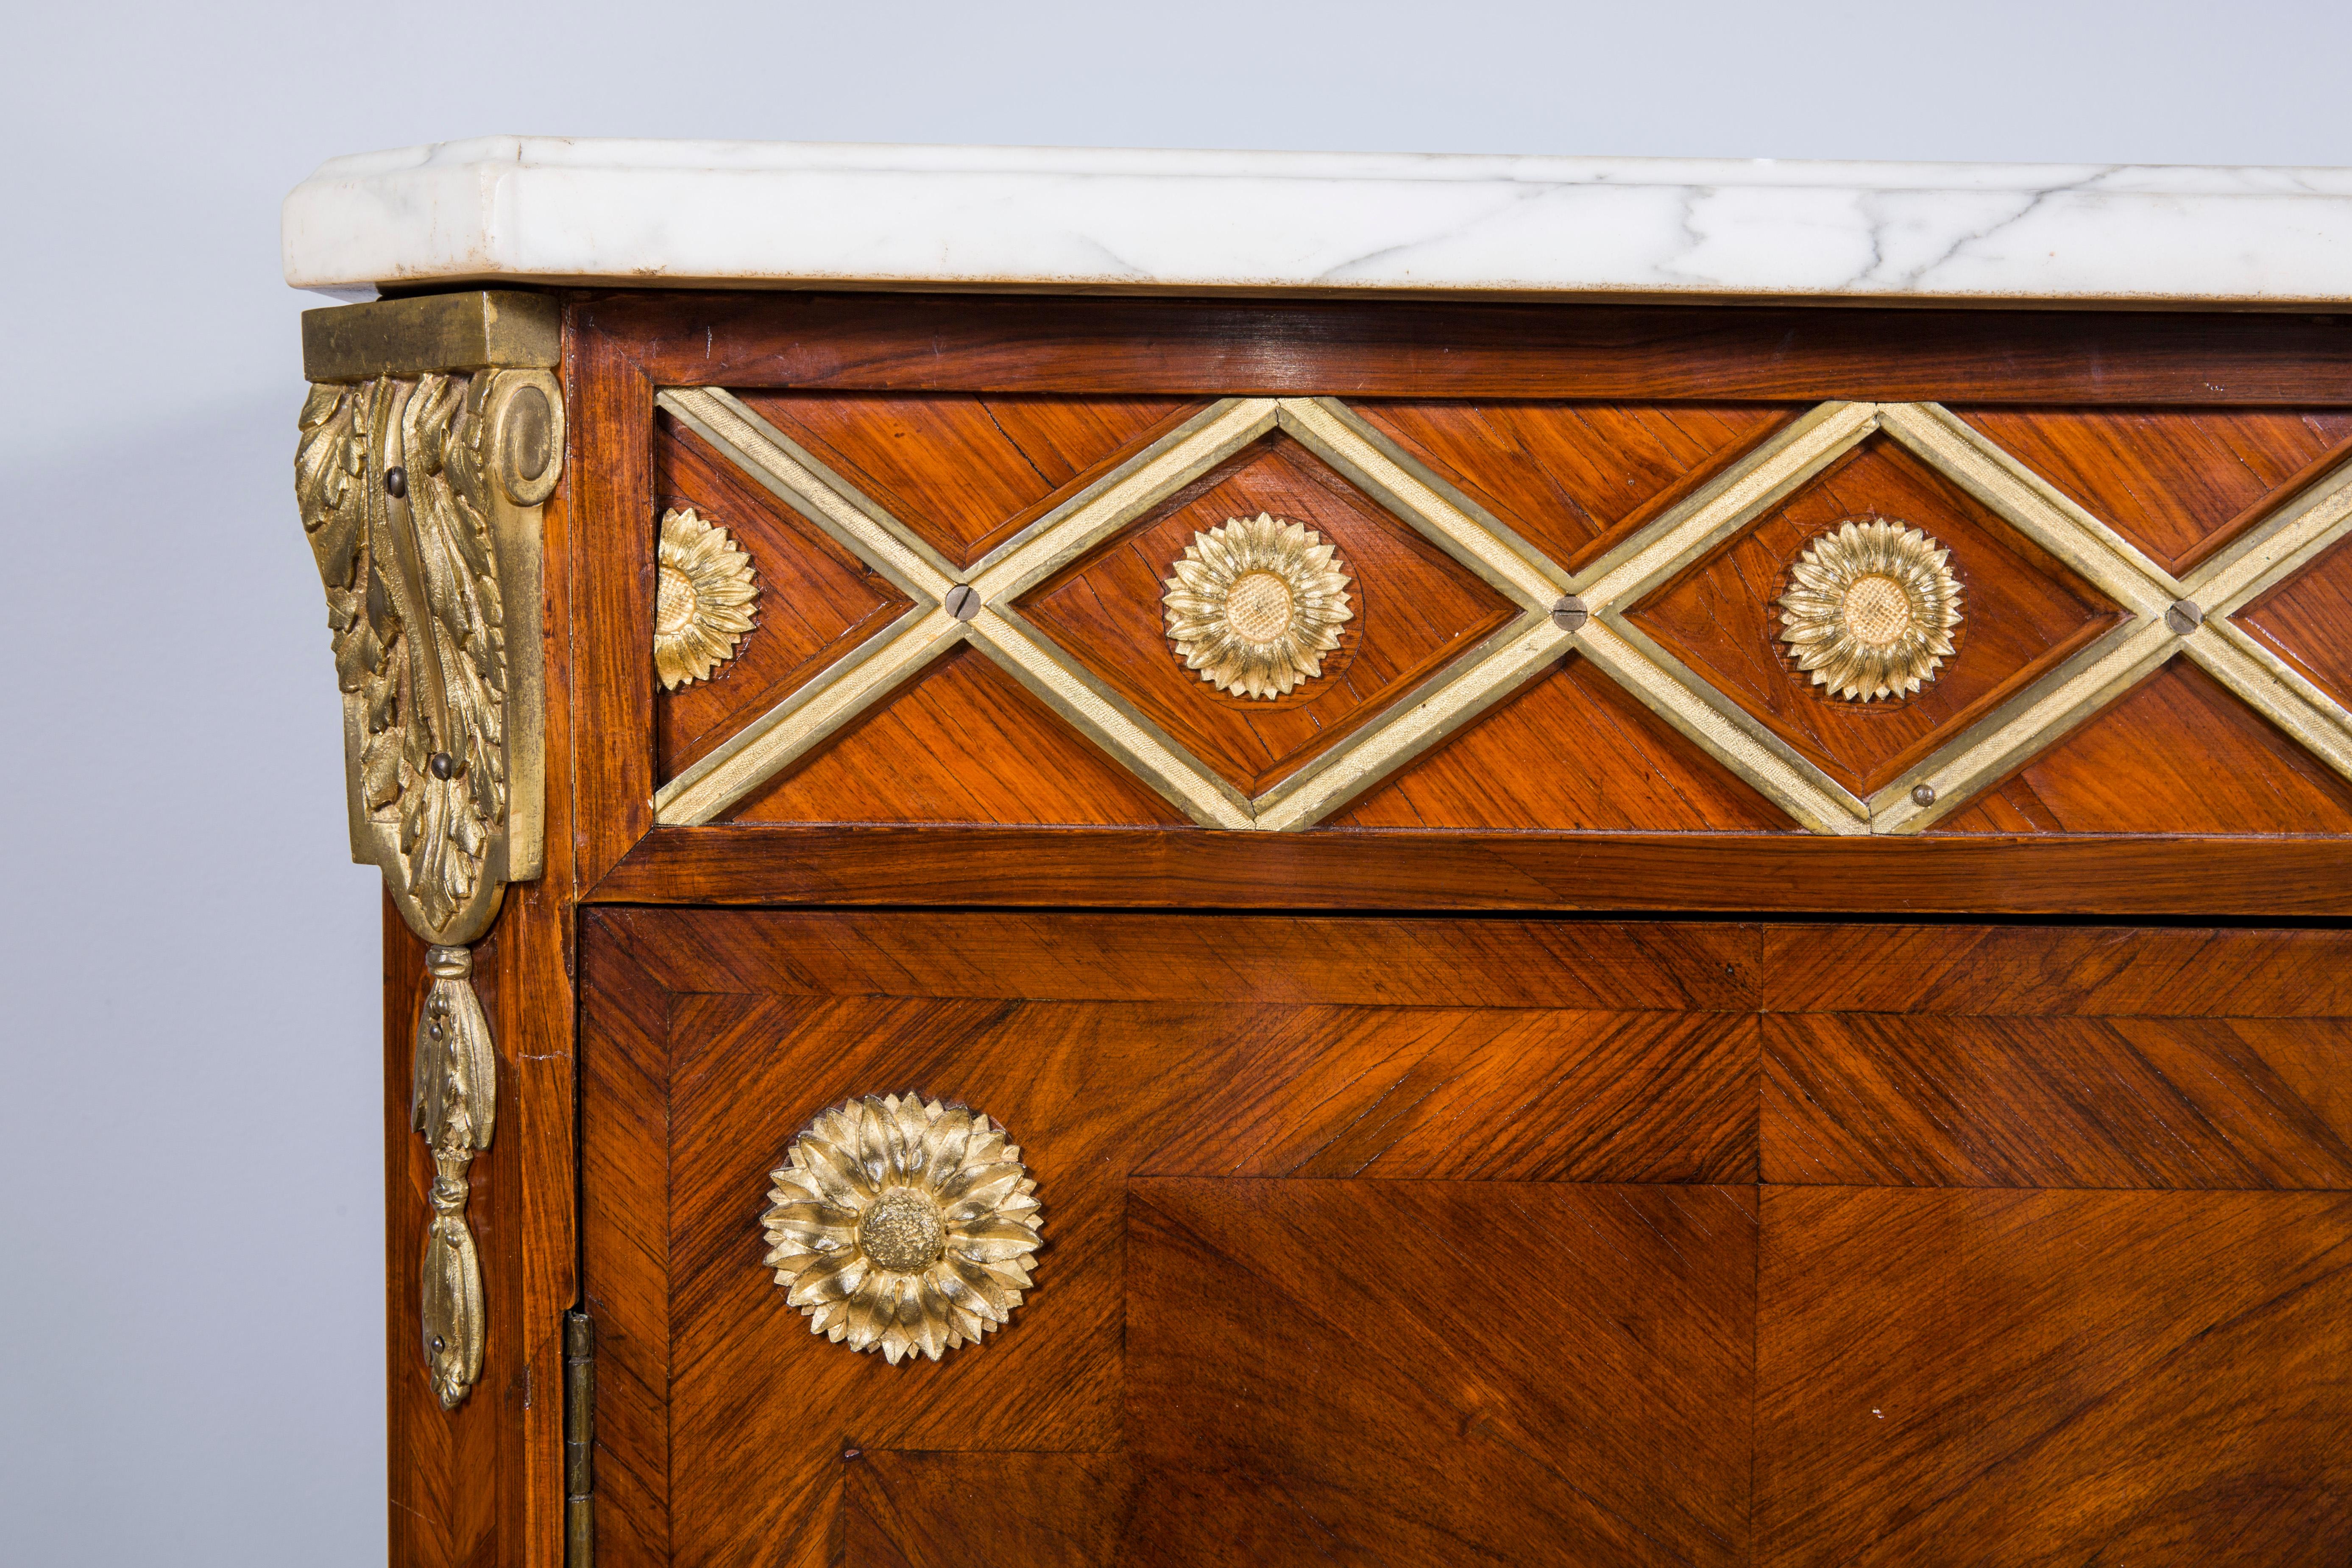 Pair of Louis XVI kingwood parquetry ormolu mounted cabinets
white marble top, over a pair of cupboard doors. French, circa 18th century
Measures: H 44 in.; W 51 in.; D 19 in.

Provenance: Sotheby's New York May 1983.

 